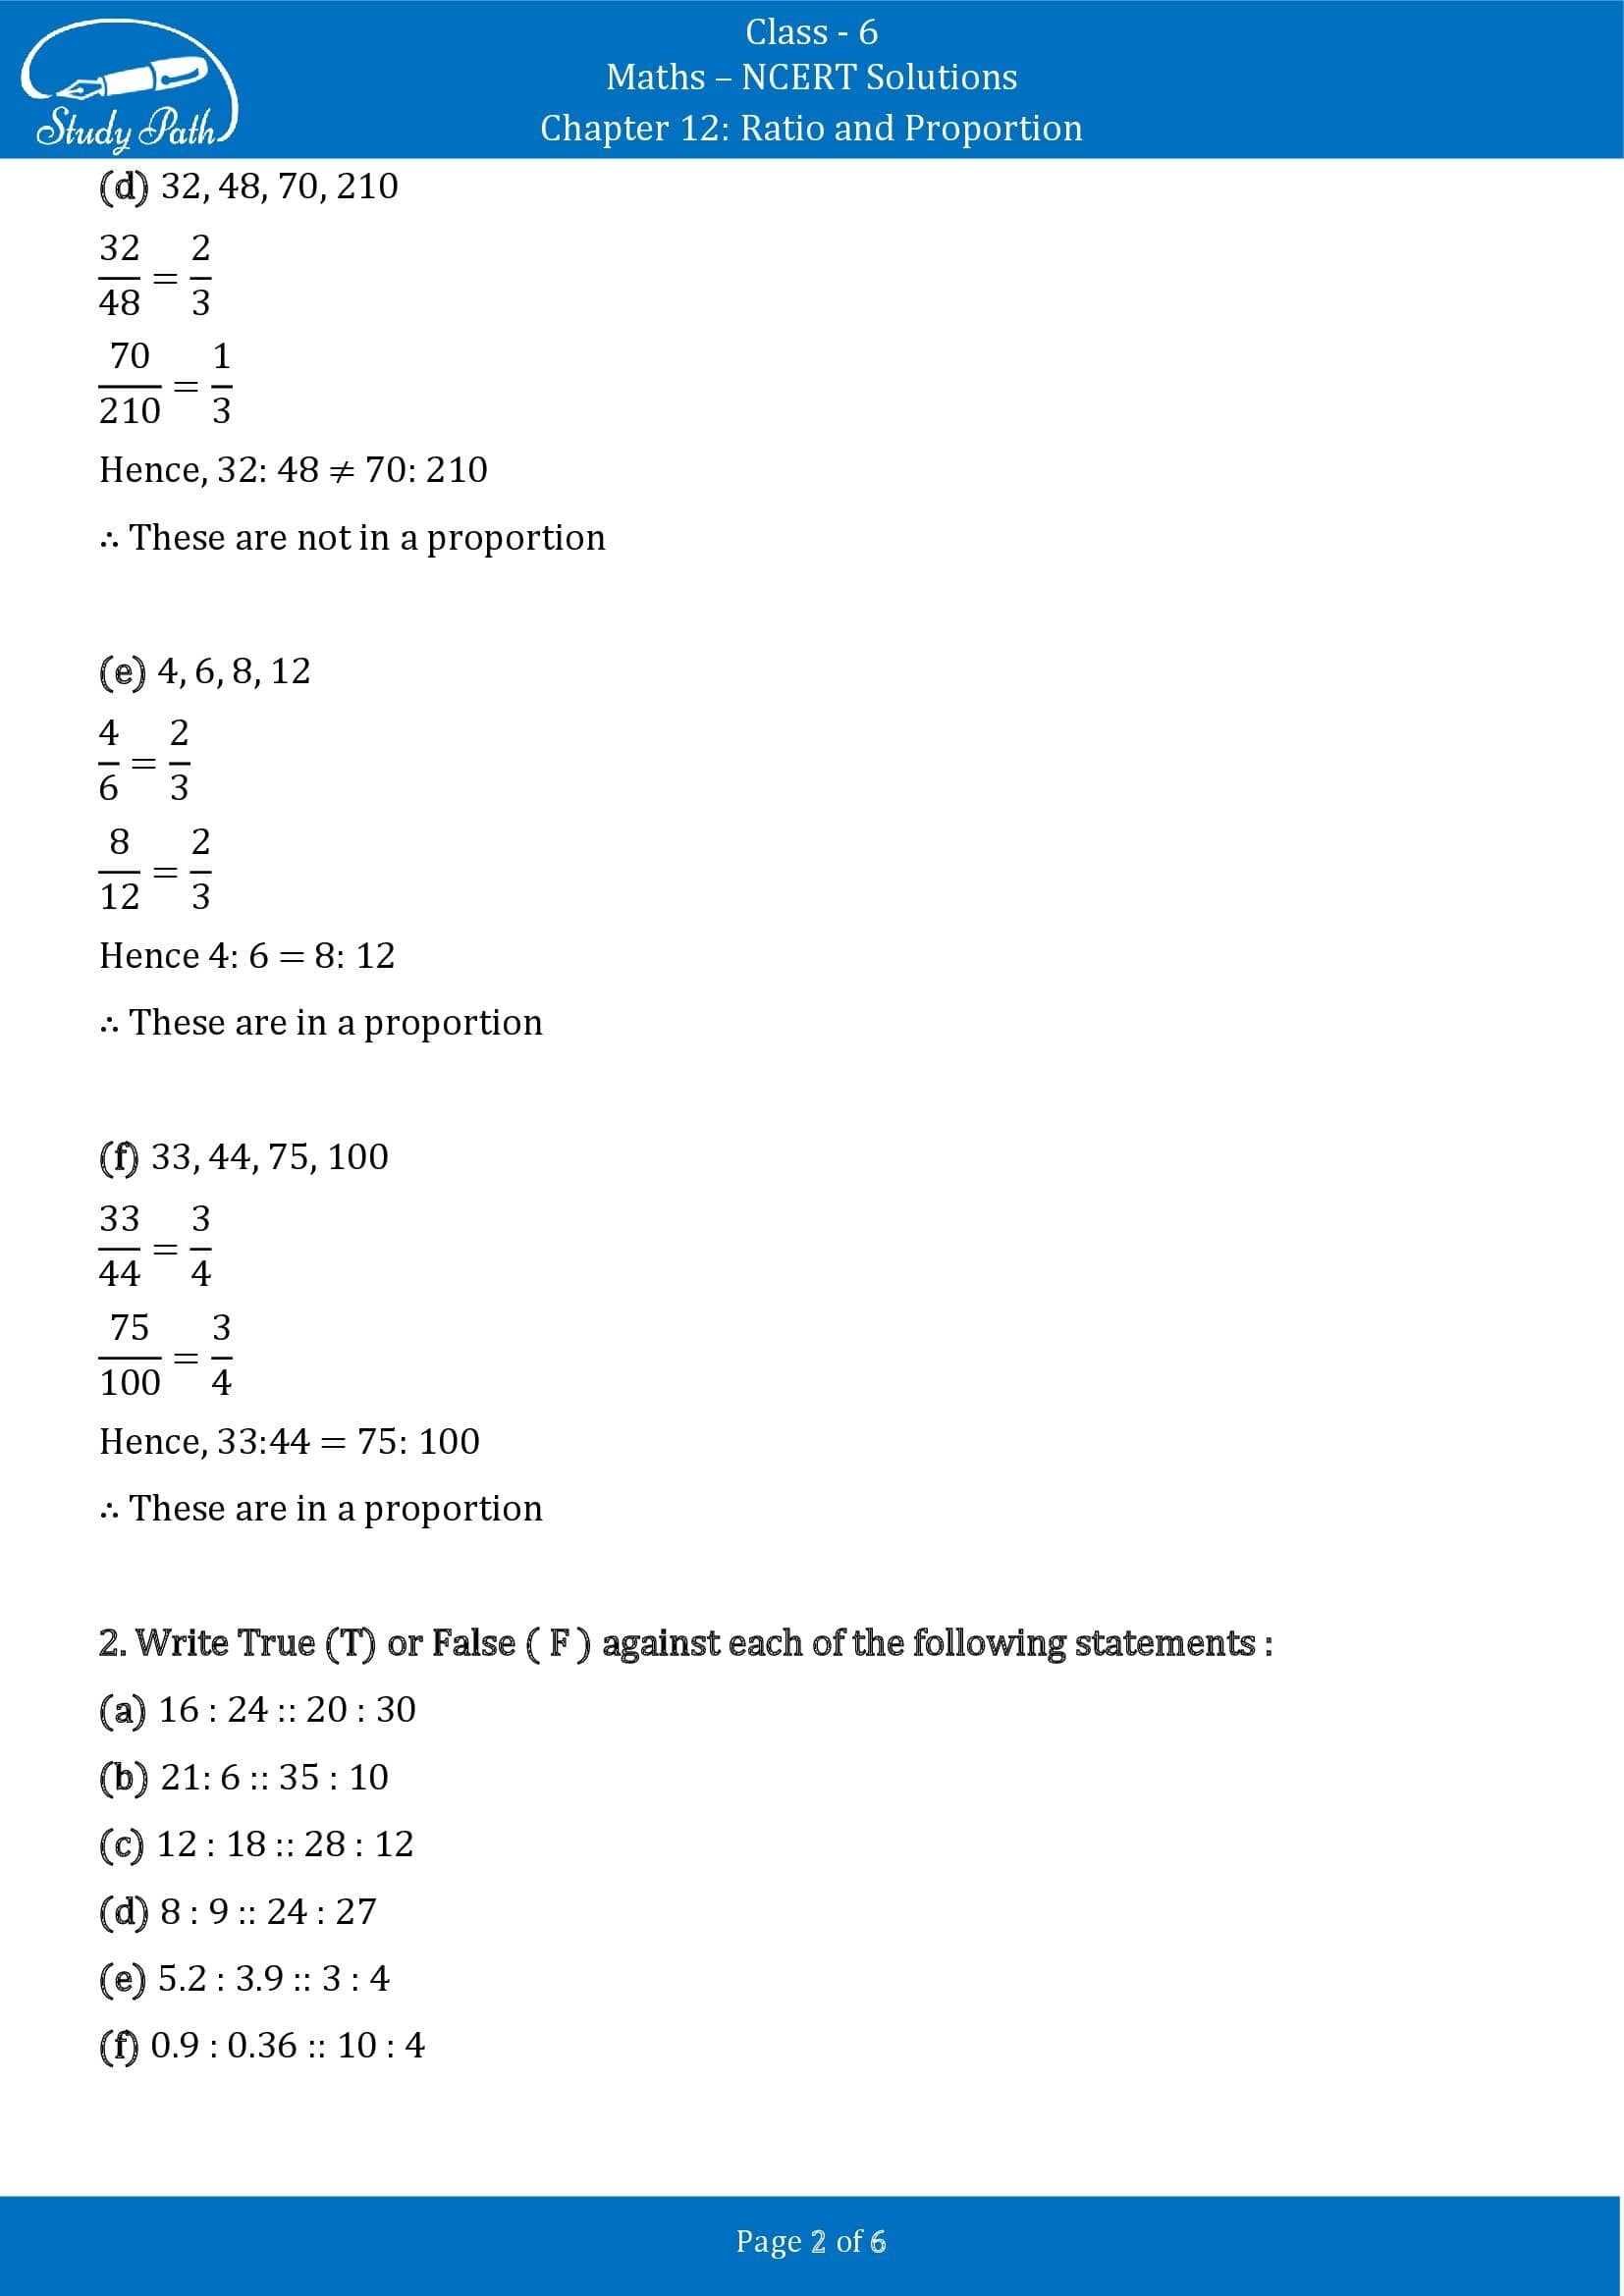 NCERT Solutions for Class 6 Maths Chapter 12 Ratio and Proportion Exercise 12.2 00002